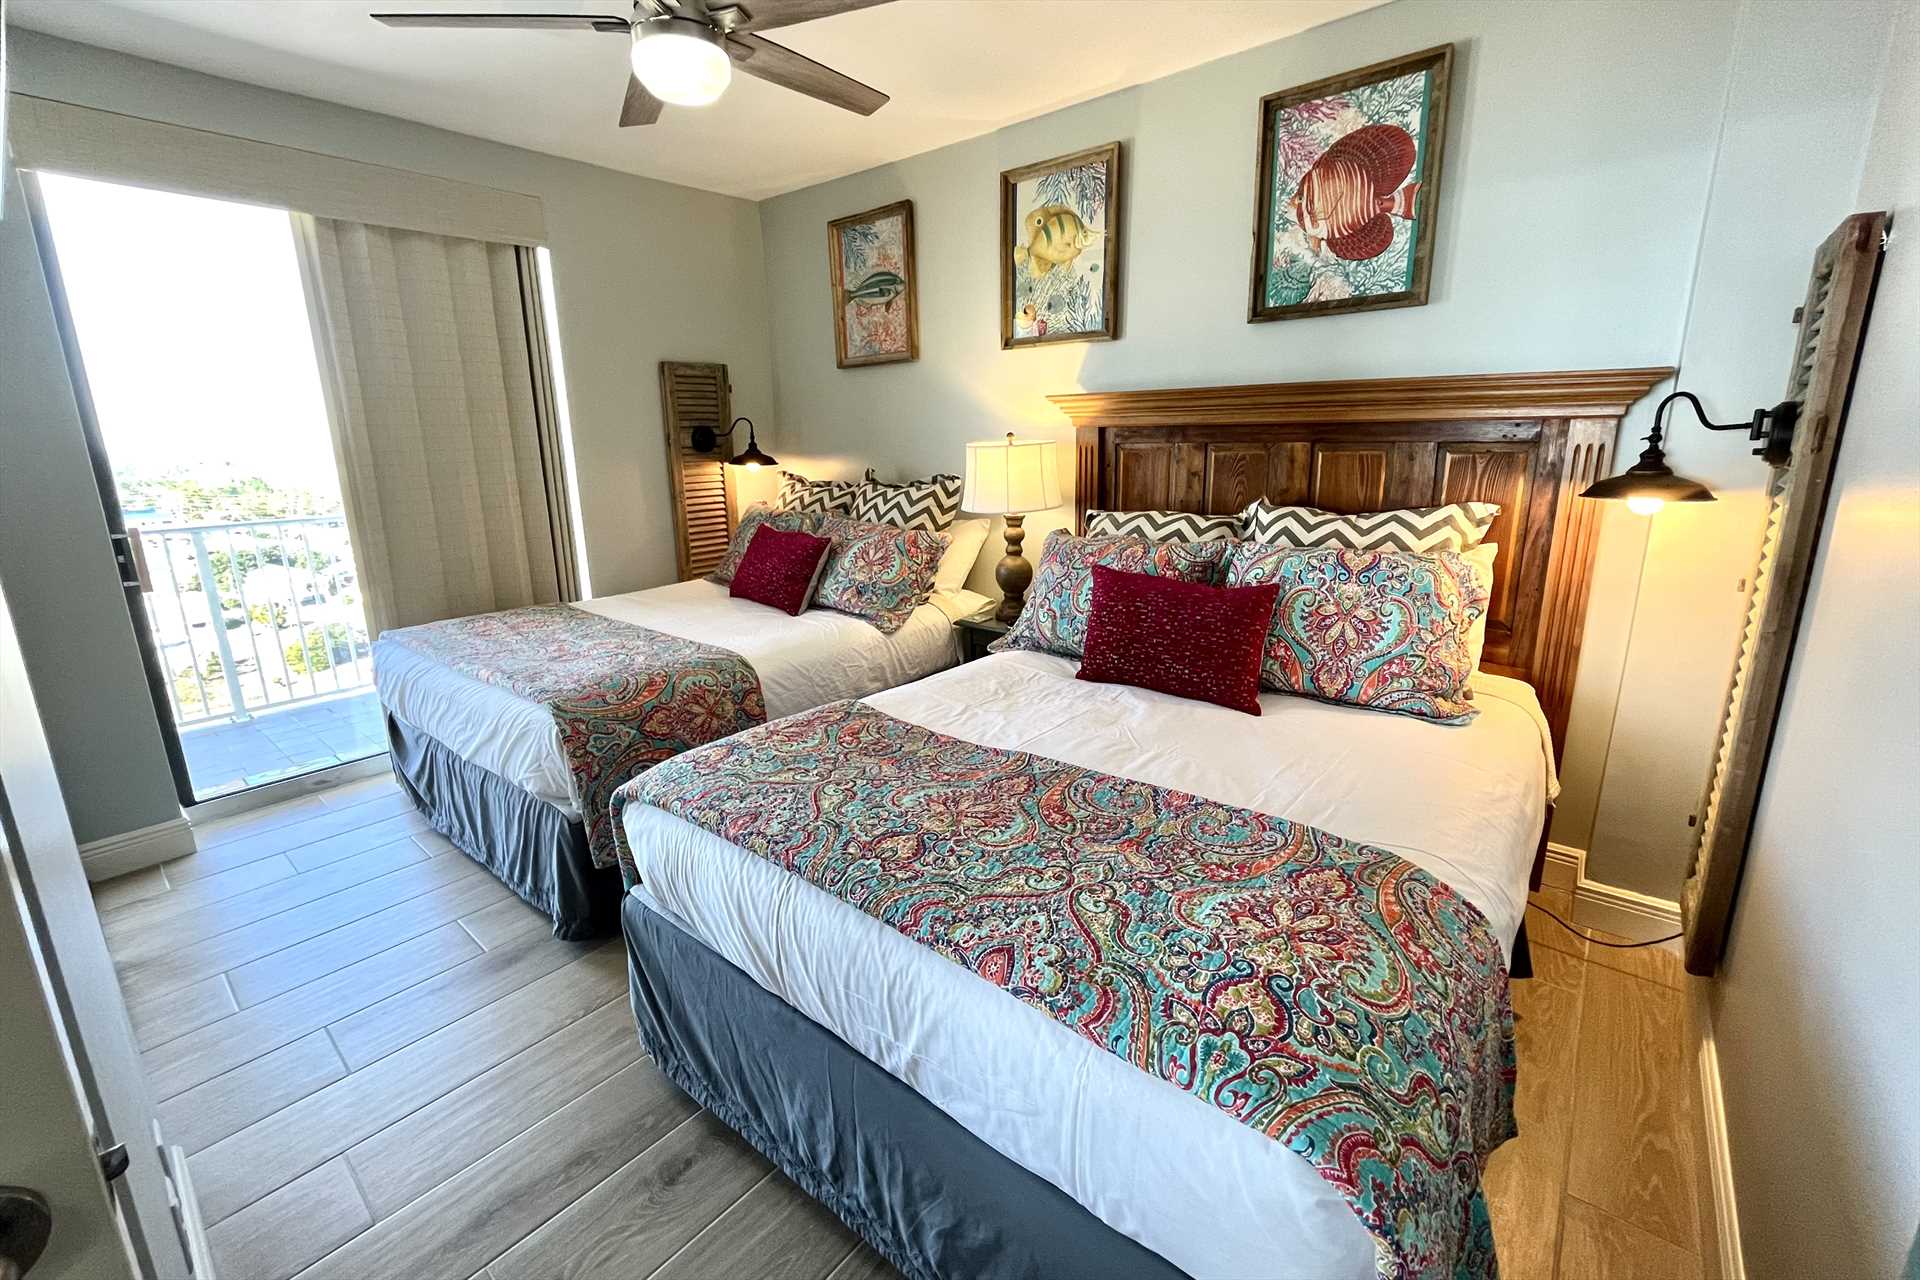 The third bedroom includes two Queen-sized beds.